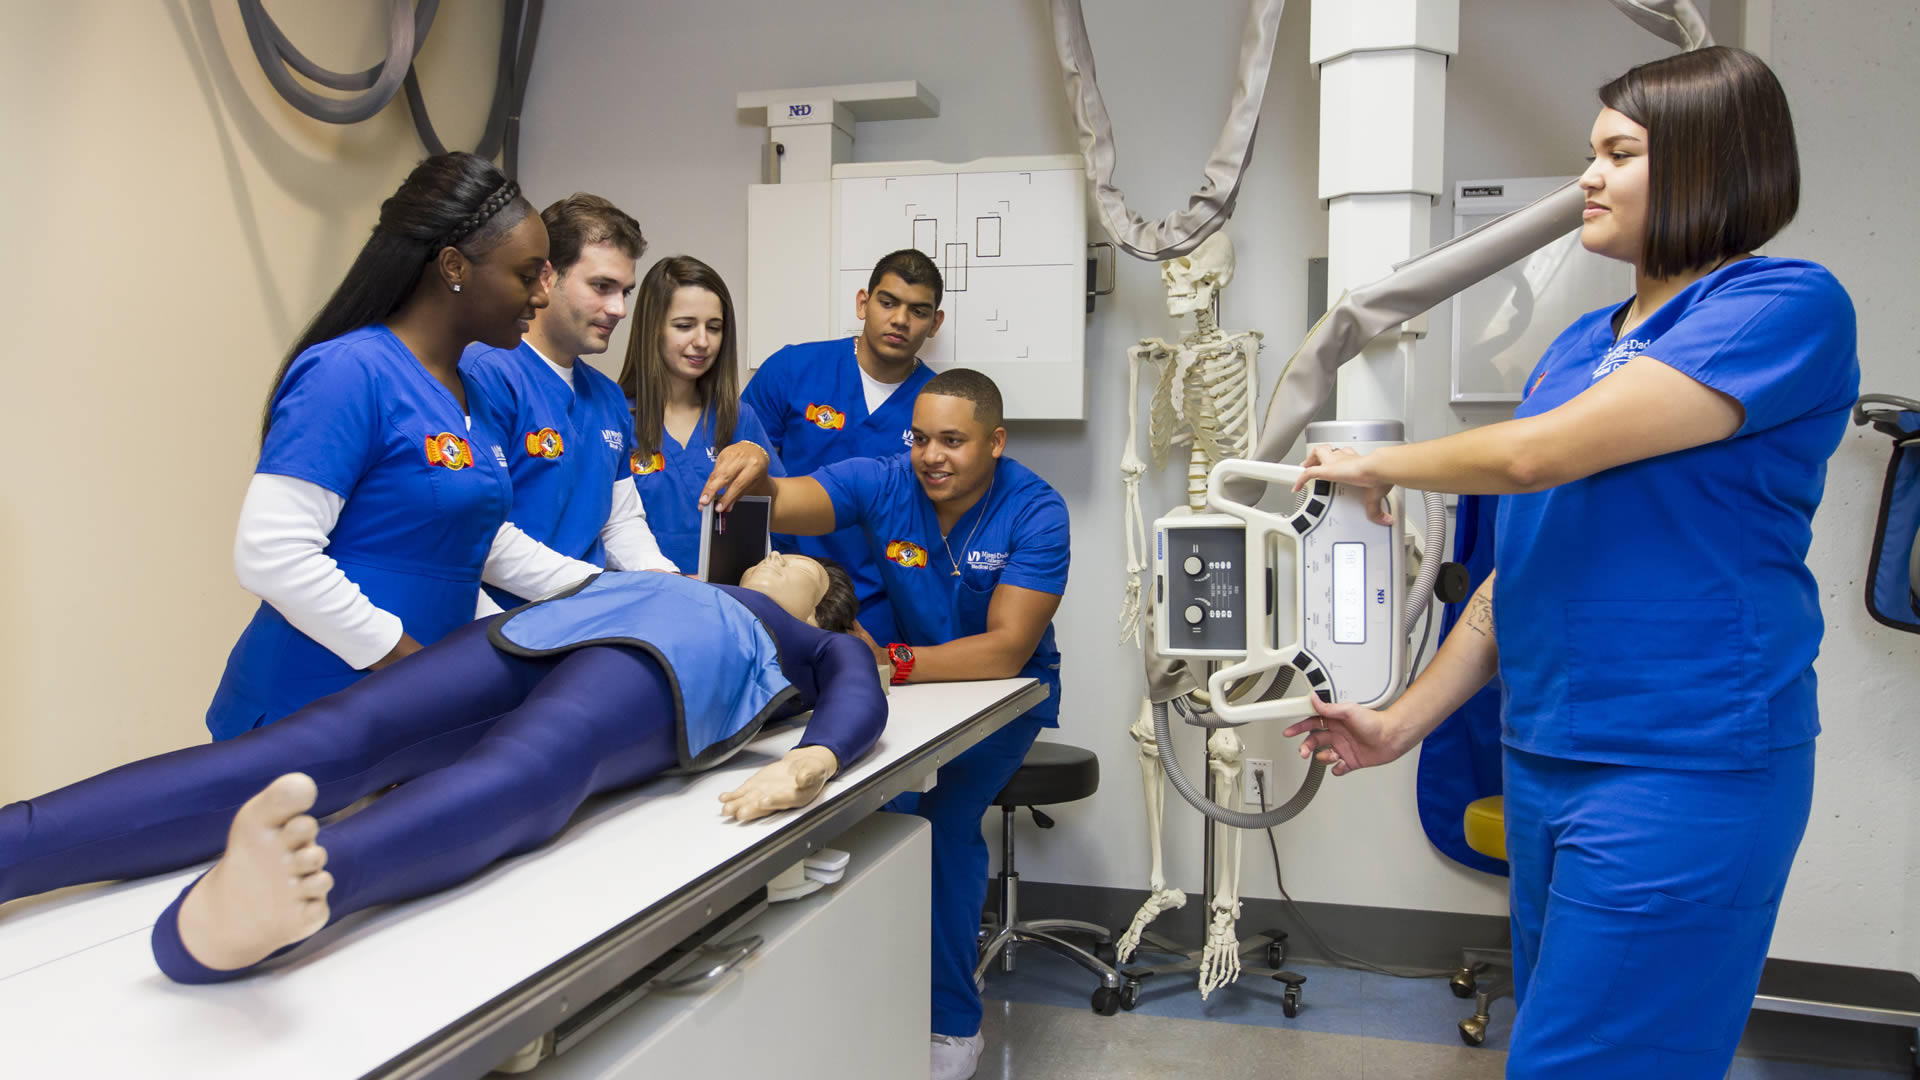 Students at the Medical Campus practice taking mock x-rays